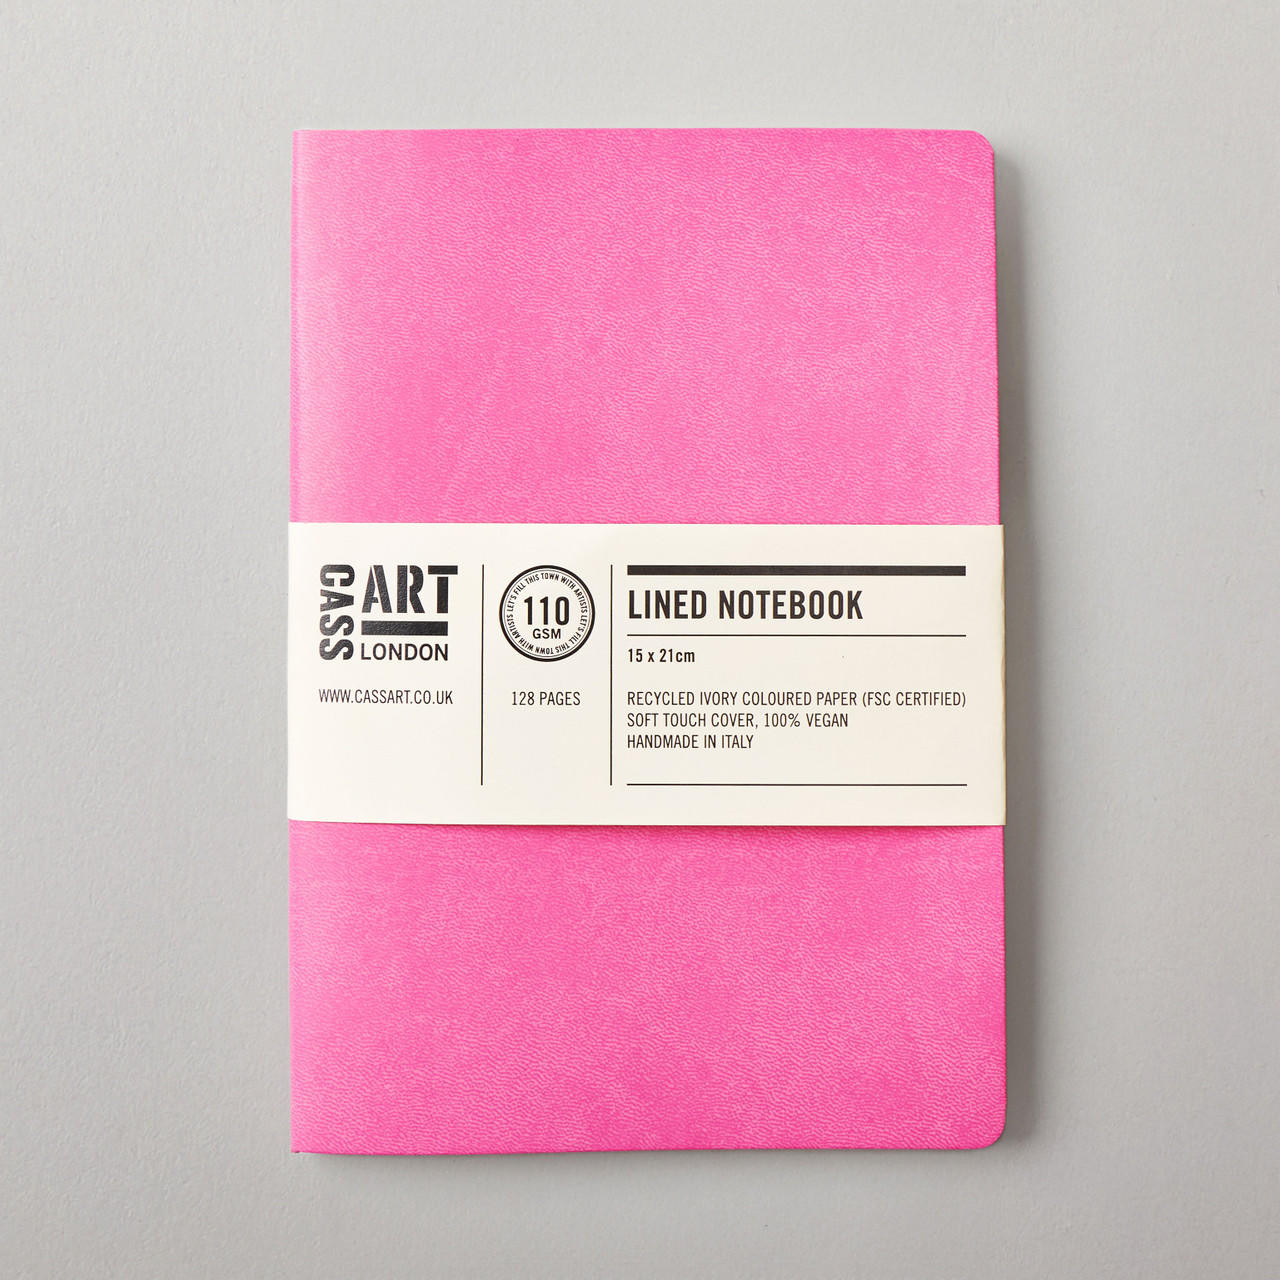 Cass Art 40th Anniversary Edition Softbound Opera Rose Lined A5 Notebook 110gsm 128 Pages